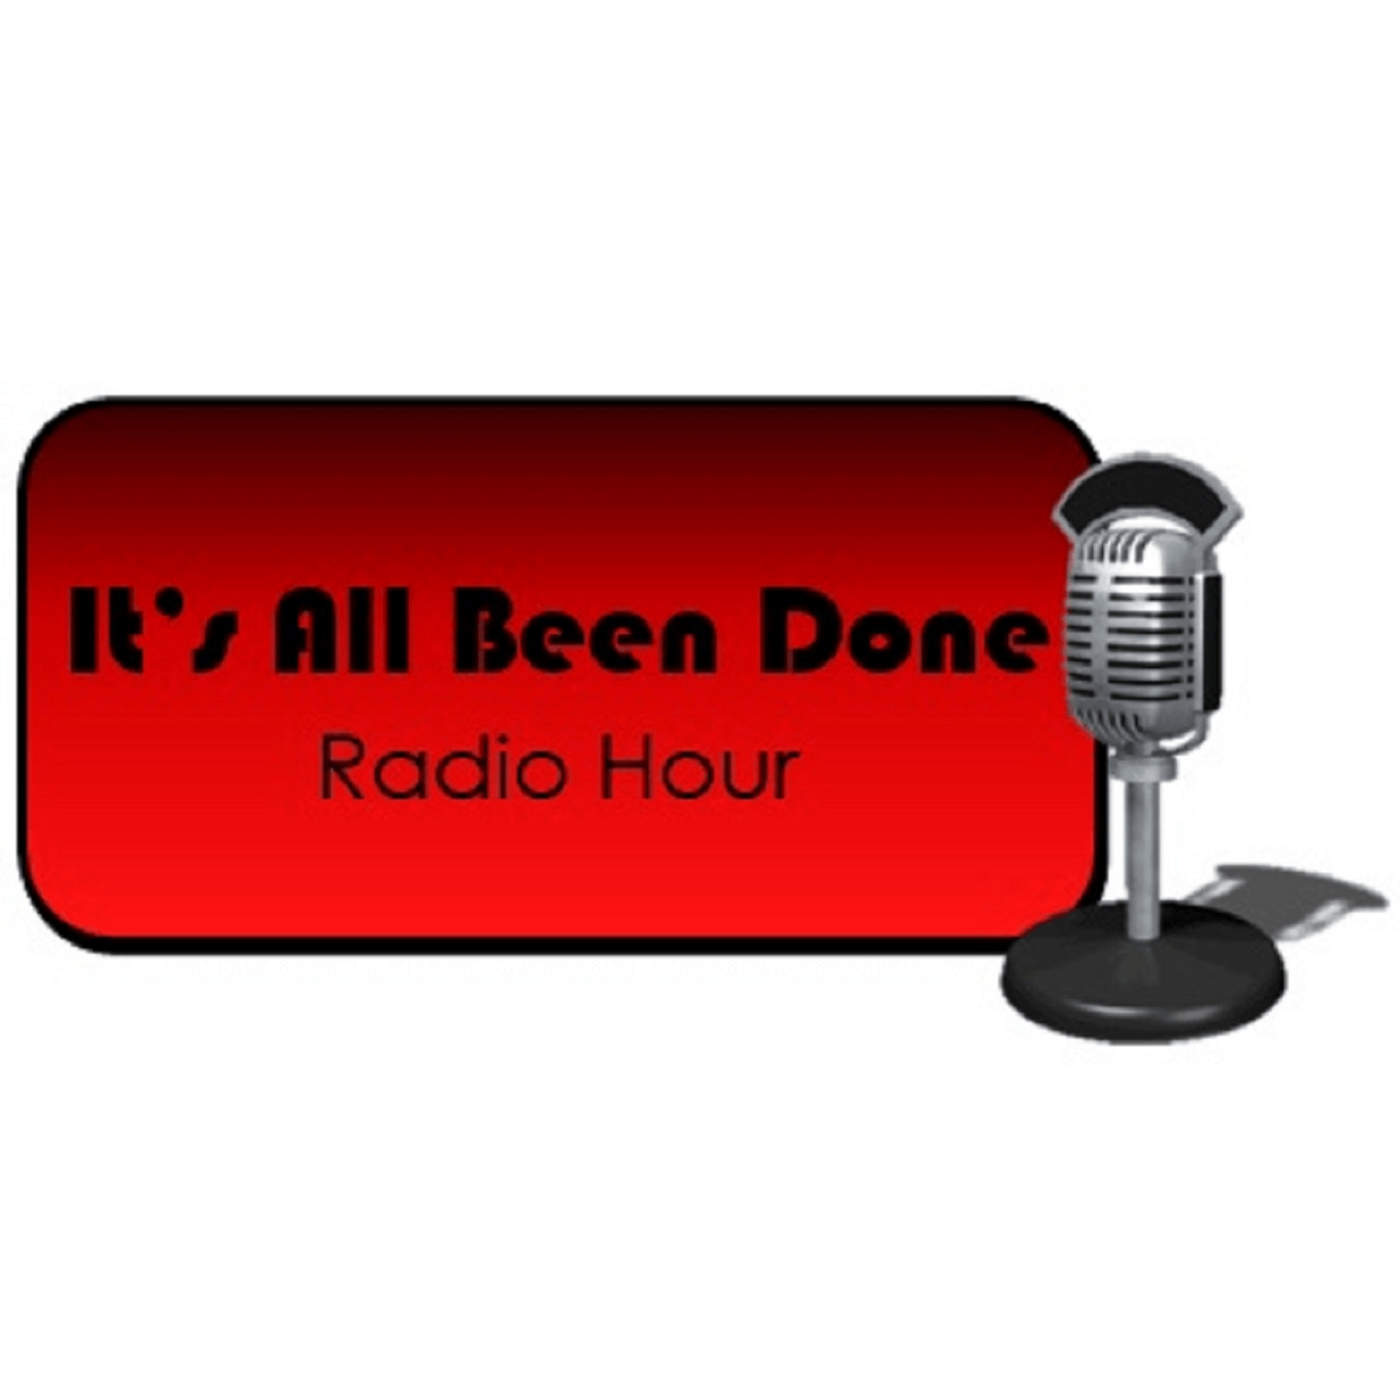 2016 Showcase: It's All Been Done Radio Hour - The Audio Verse Awards